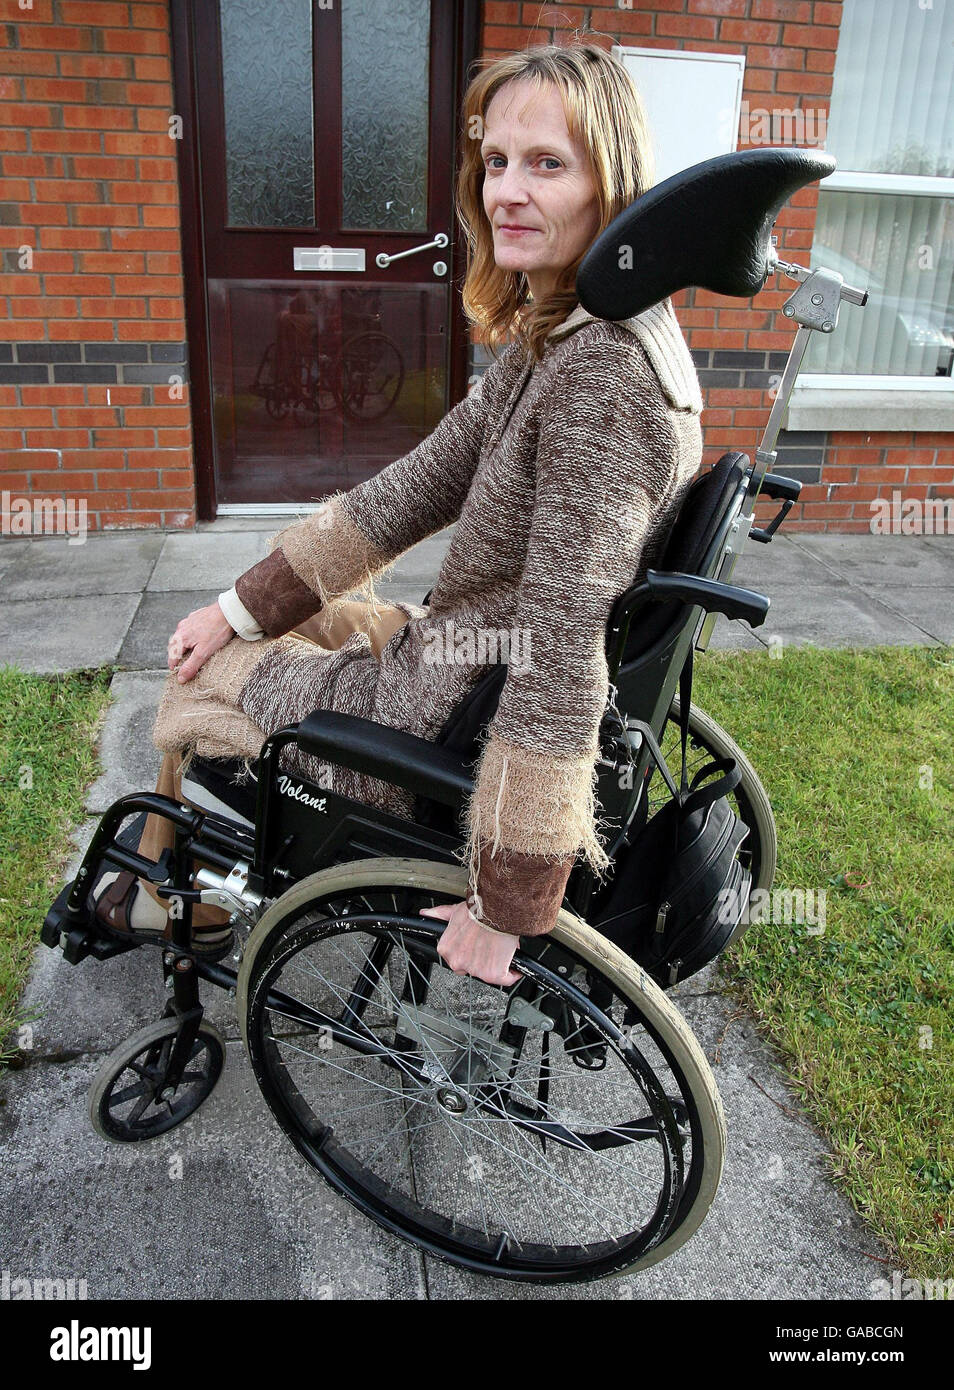 Disabled regularly ripped off by taxi drivers, committee told. Barbara Fleming at her east Belfast home. Stock Photo